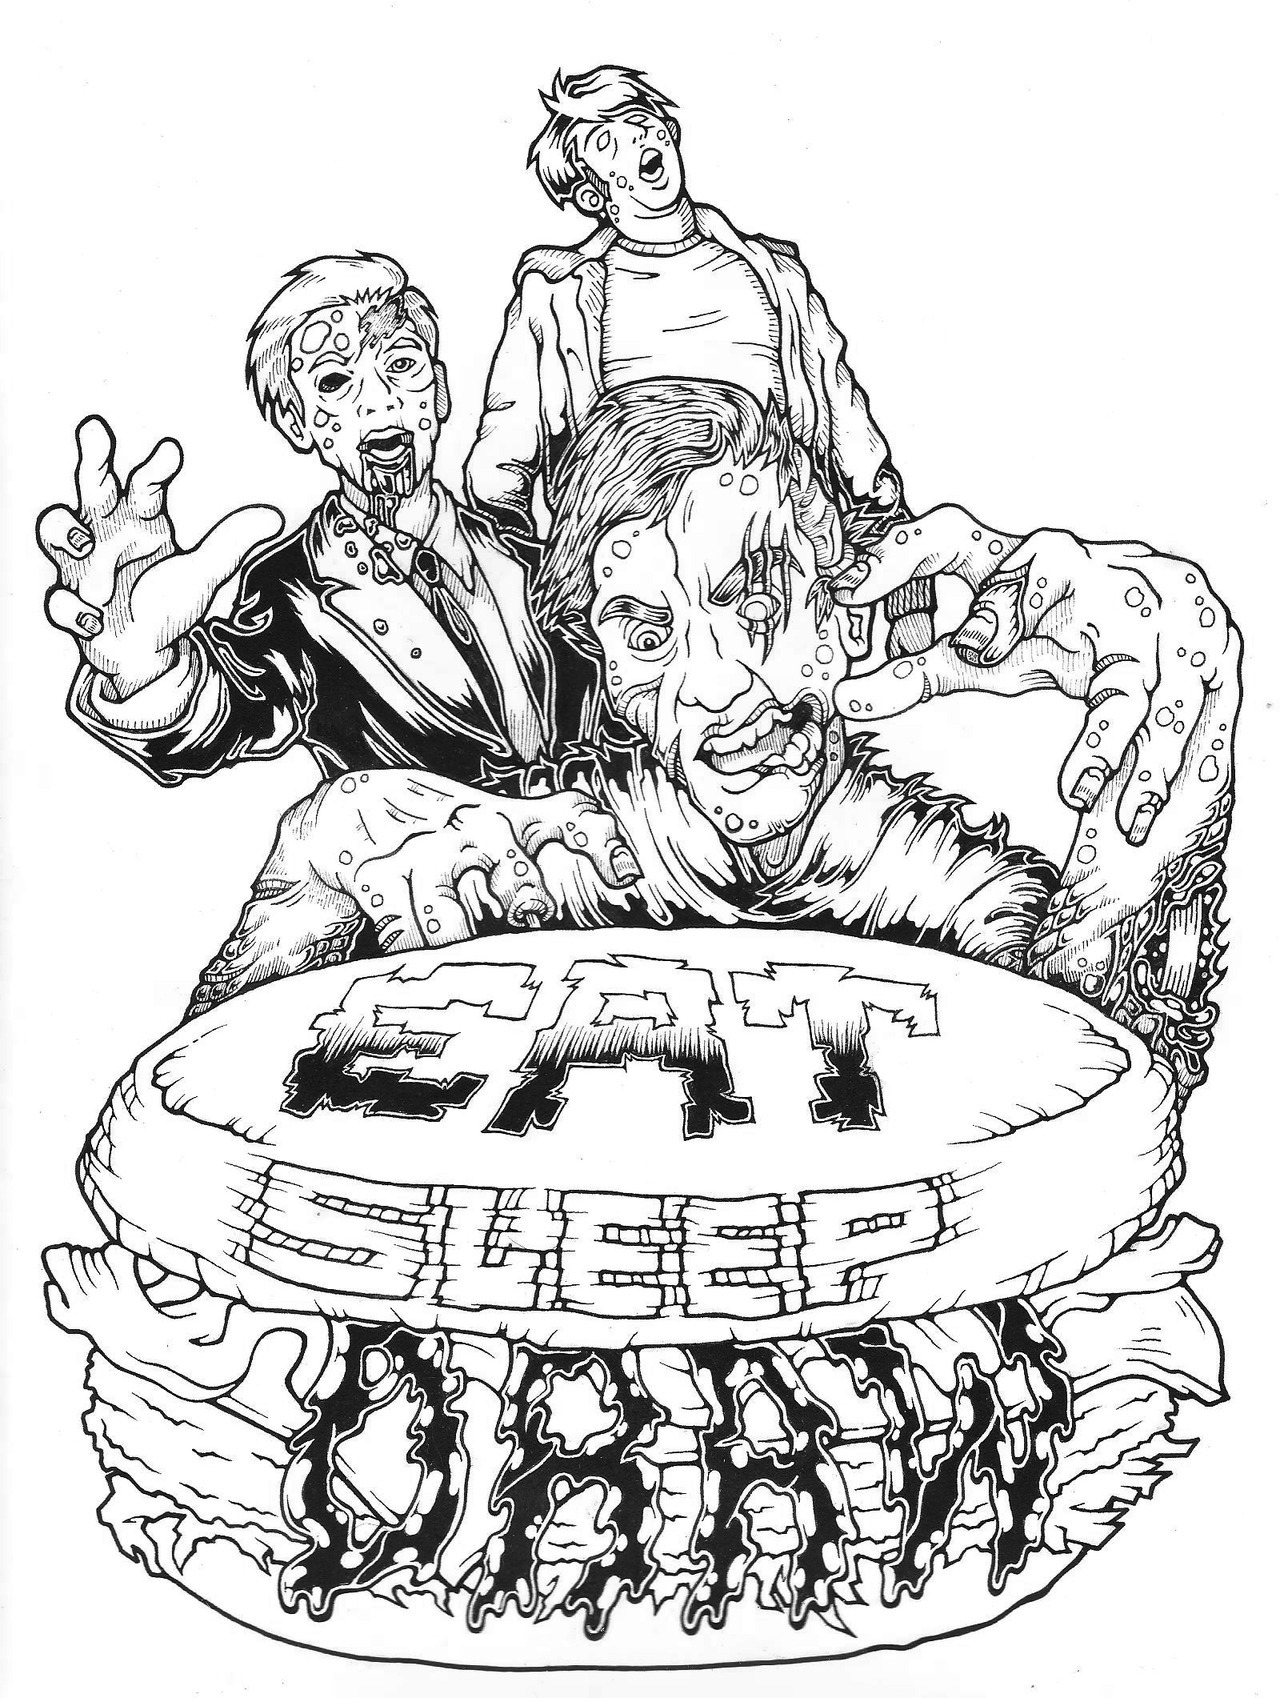 The original artwork for the recently released EatSleepDraw sketchbook!I&#8217;m super proud of this guy and it was incredibly fun to draw.The number of hours pumped into it was totally worth it!Drawn with Micron Pens on Watercolour Paper  &#8212;&#8212;&#8212; Happy Friday the 13th! Use the code FRIDAY13 to get 13% off your entire order in our store. ($10 min. purchase)  Offer good TODAY ONLY. Always free global shipping. check em out